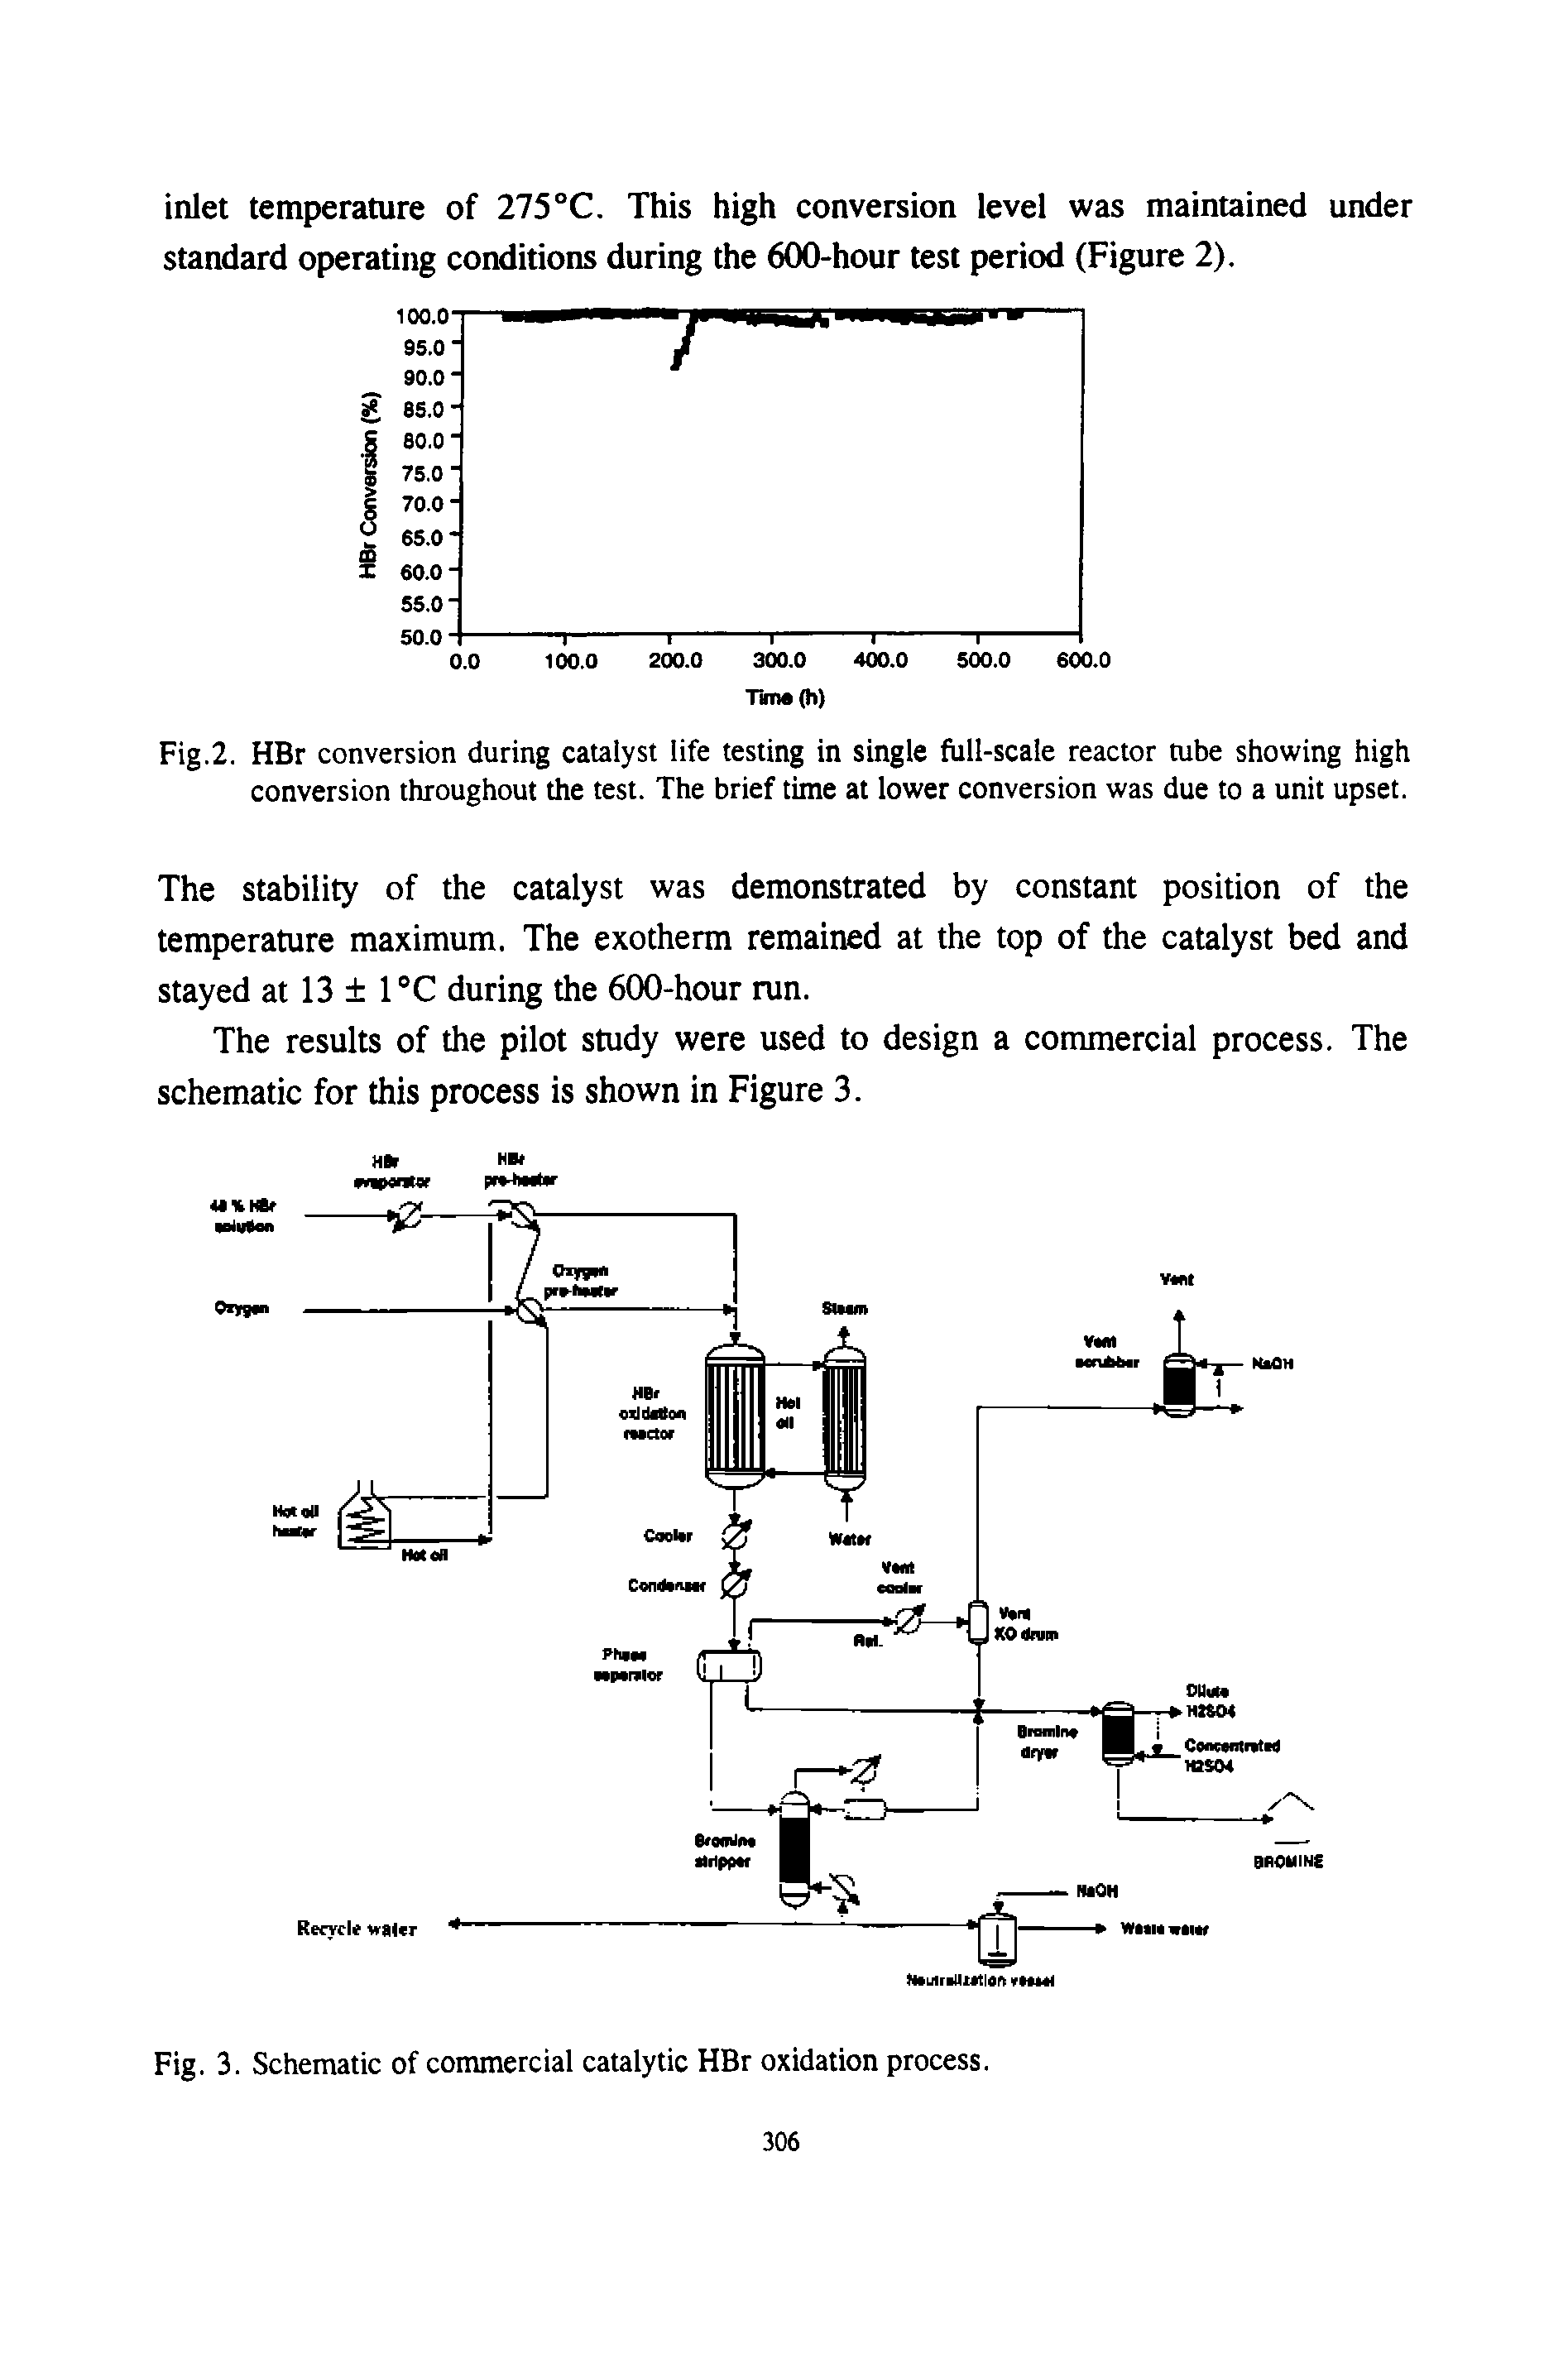 Fig.2. HBr conversion during catalyst life testing in single full-scale reactor tube showing high conversion throughout the test. The brief time at lower conversion was due to a unit upset.